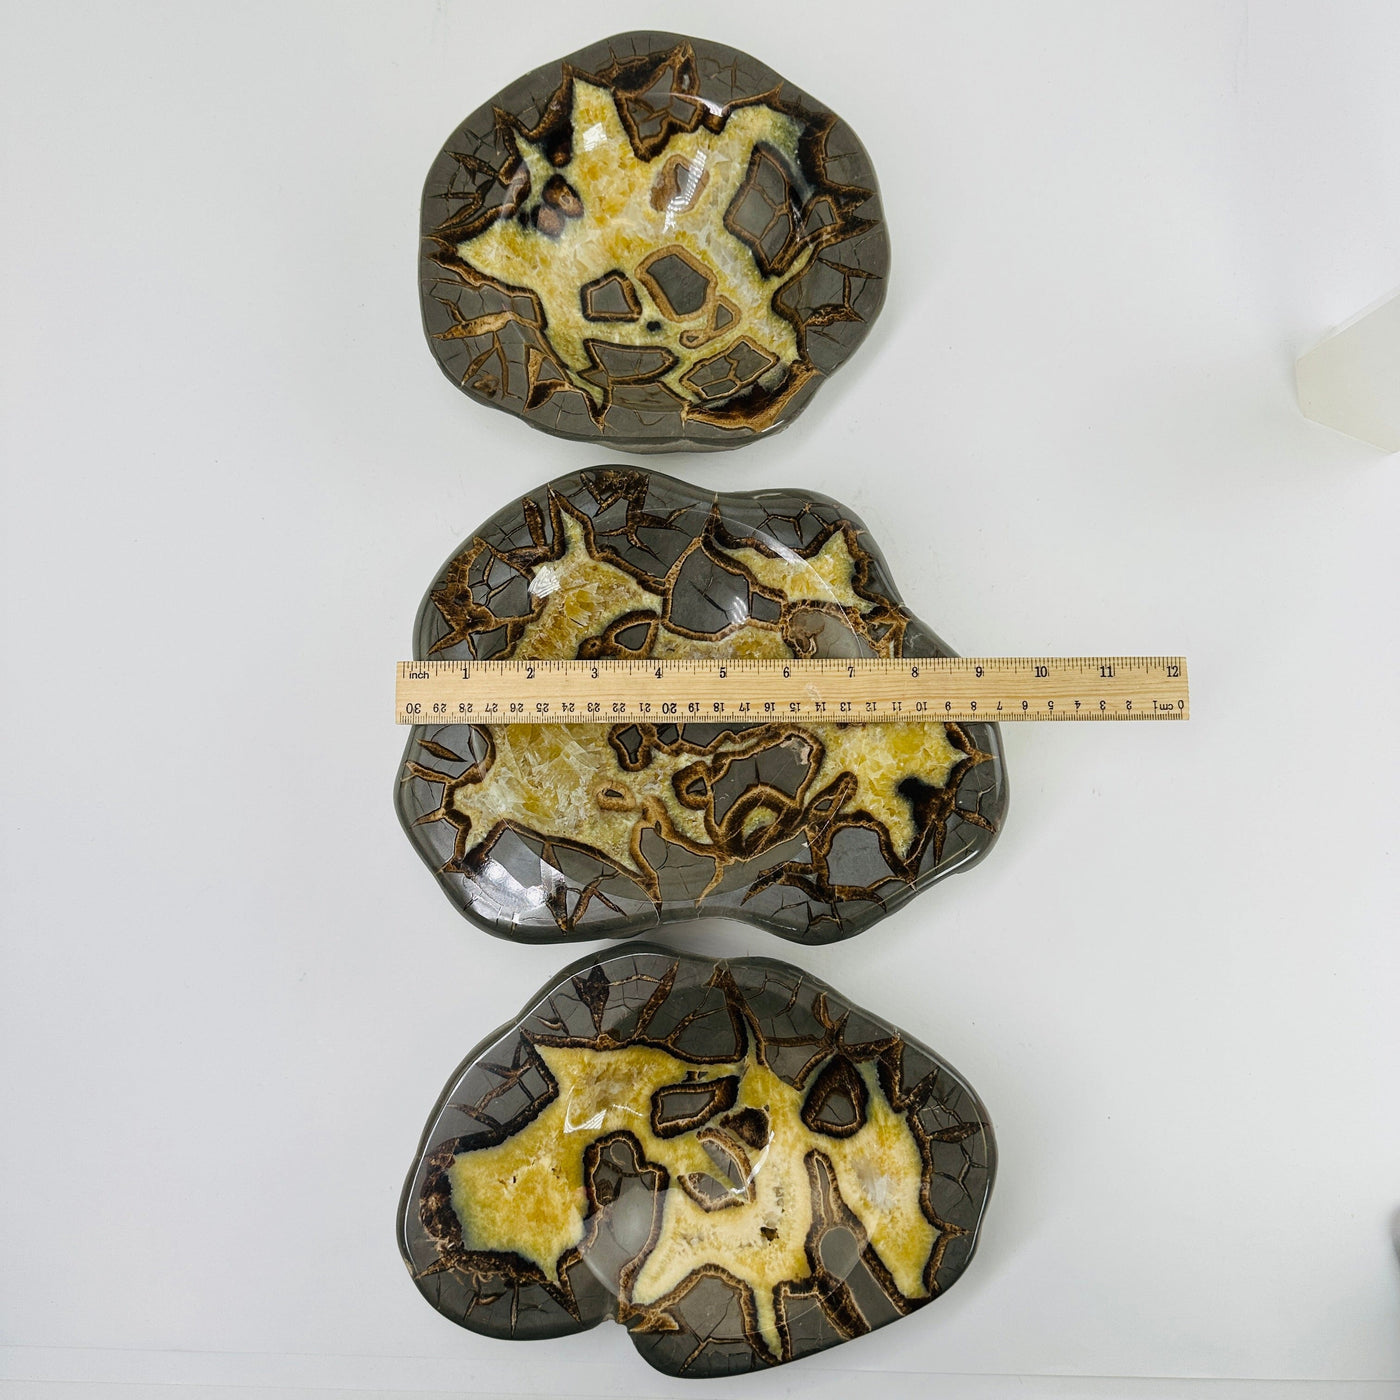 septarian bowls next to a ruler for size reference